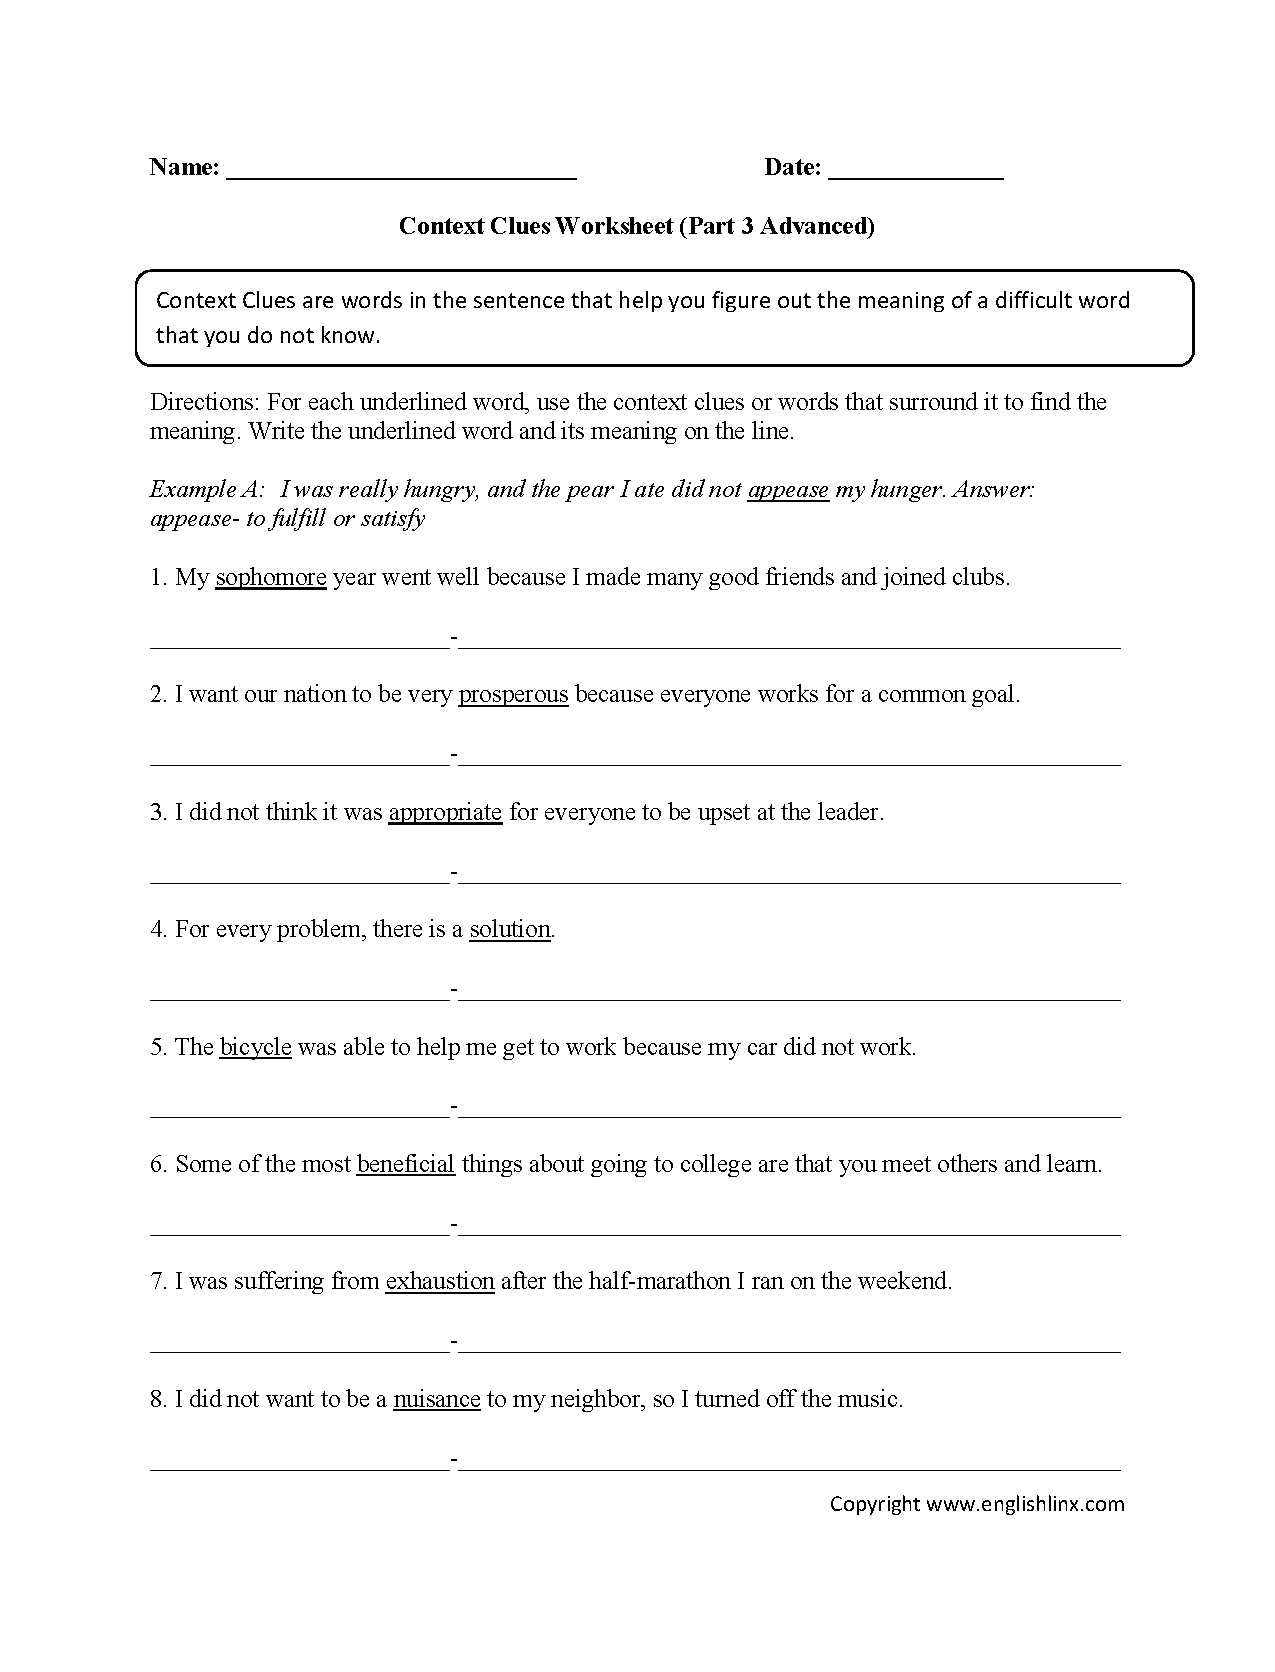 Analyzing Literature Worksheet or Context Clues Worksheets Advanced Part 3